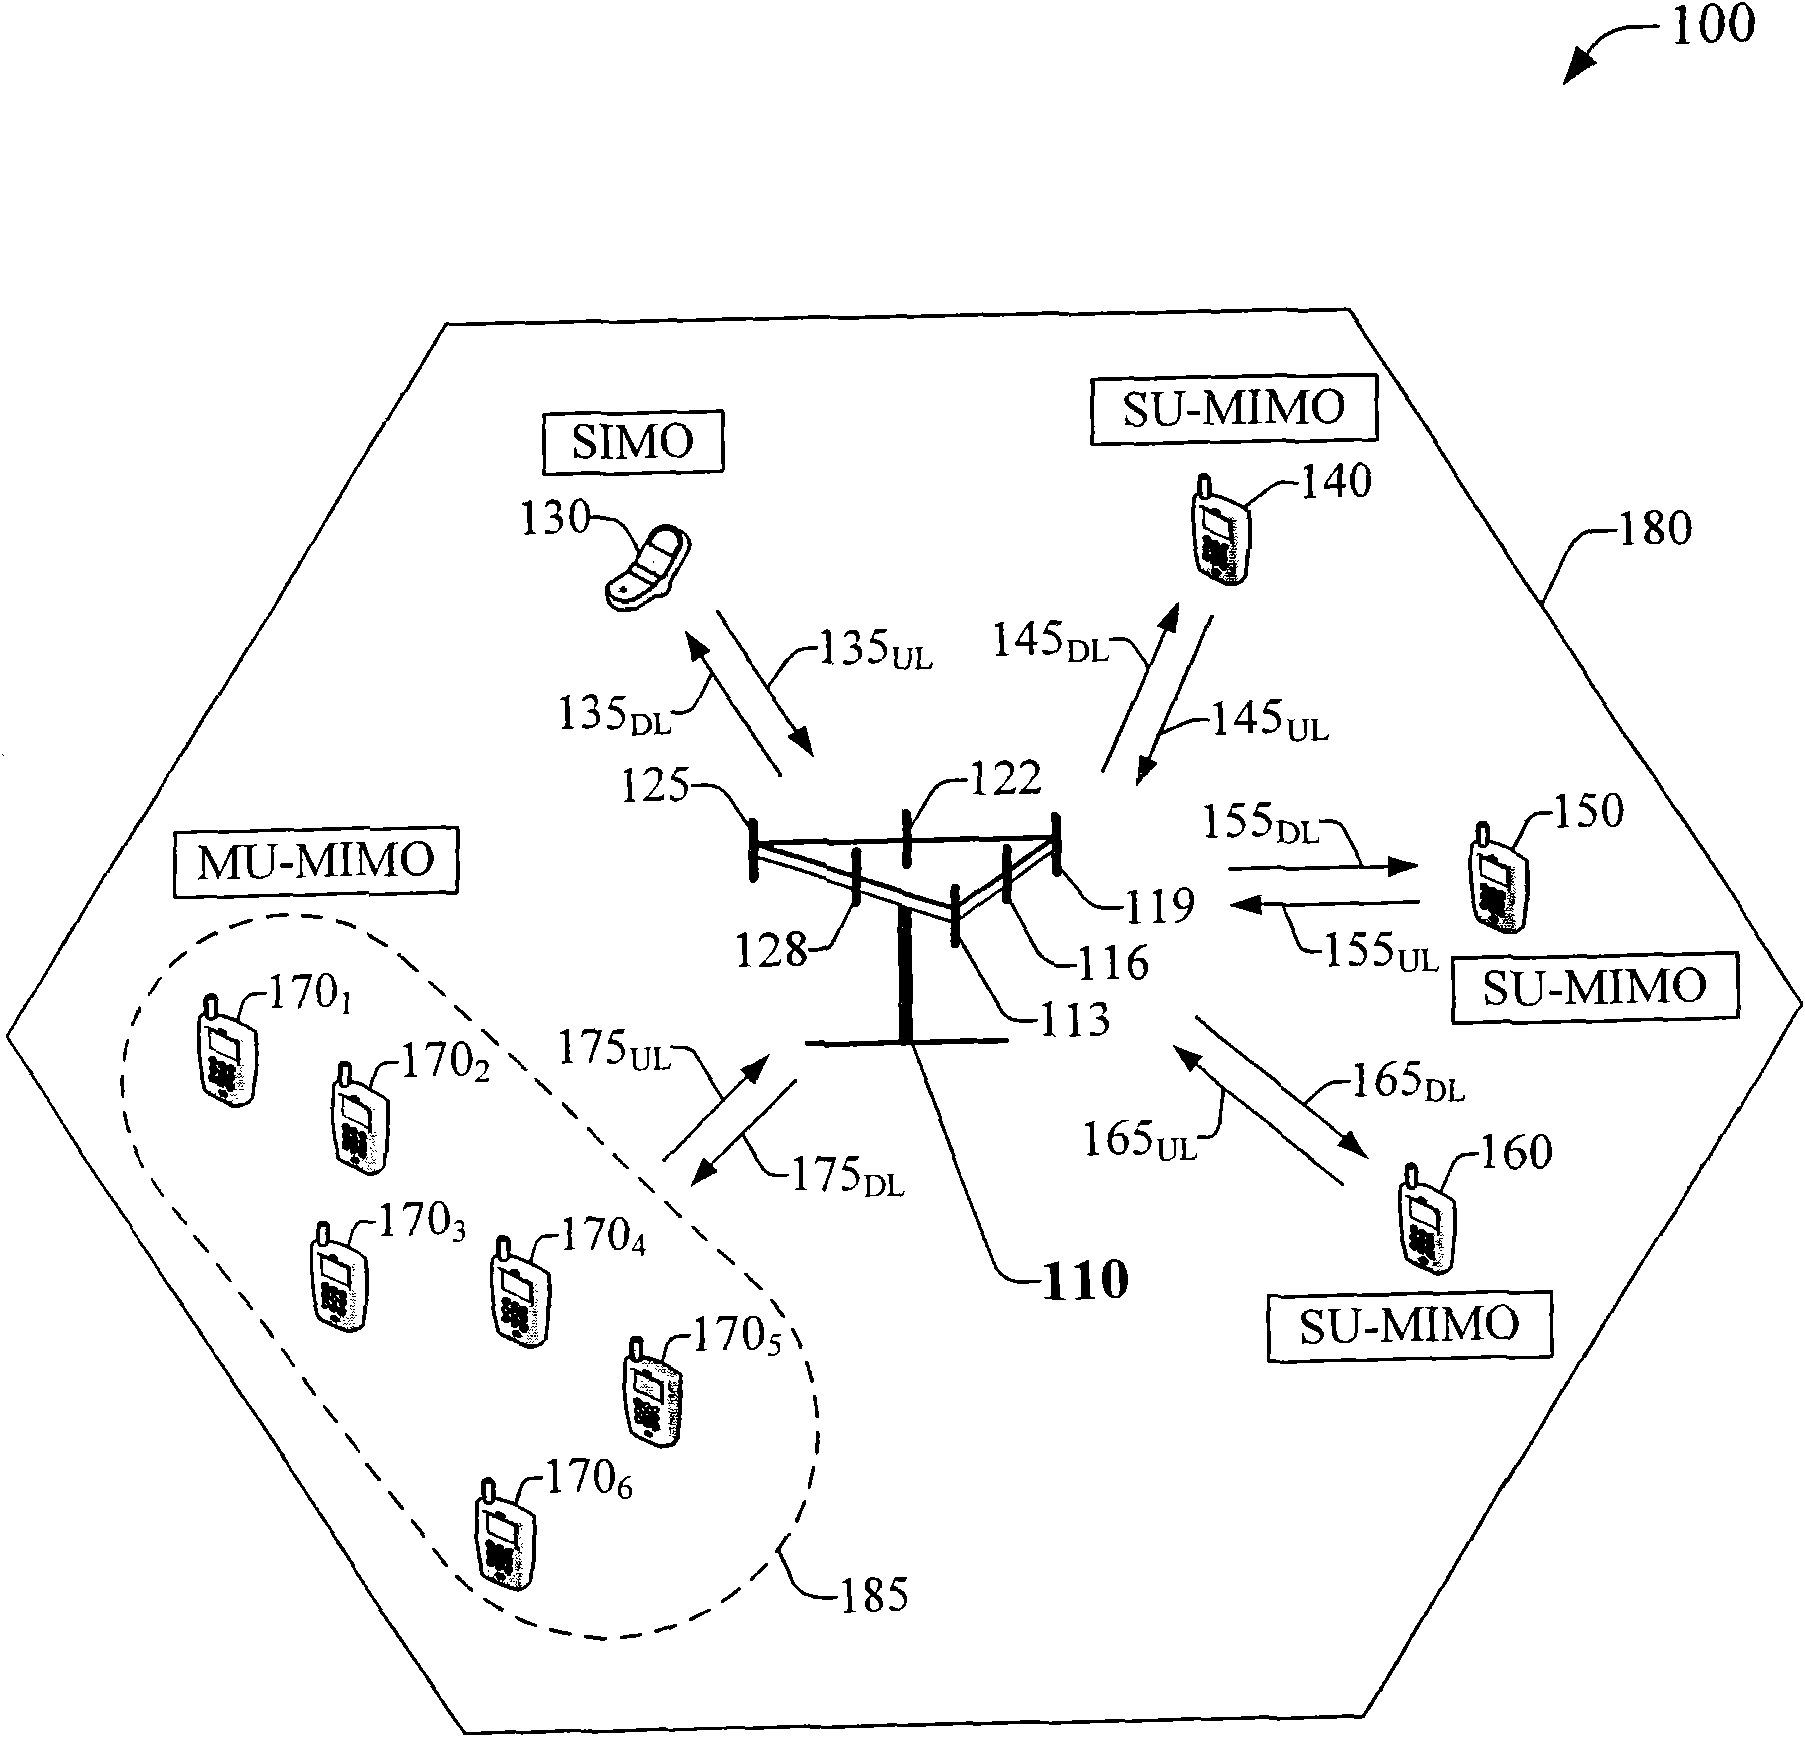 Hierarchical modulation for communication channels in single-carrier frequency division multiple access